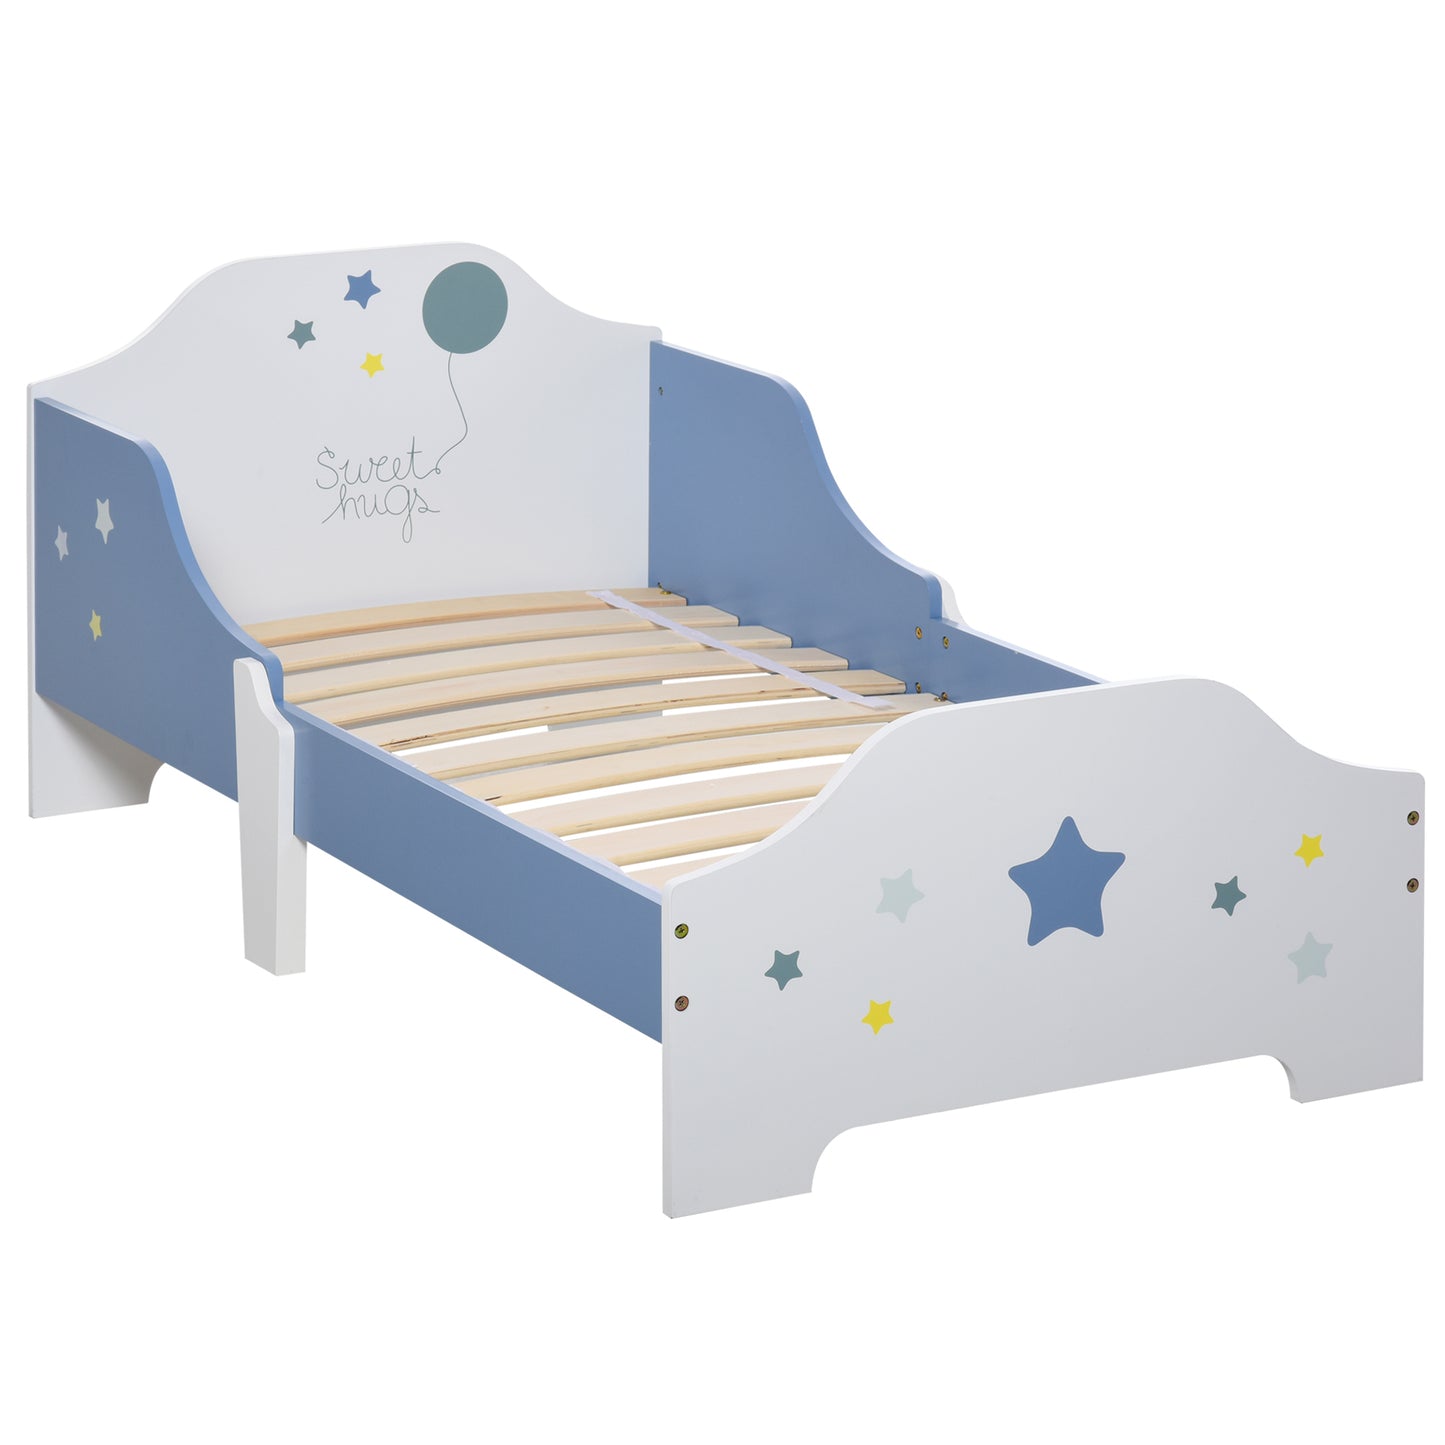 HOMCOM Kids Toddler Wooden Bed Round Edged with Guardrails Stars Image 143 x 74 x 59cm